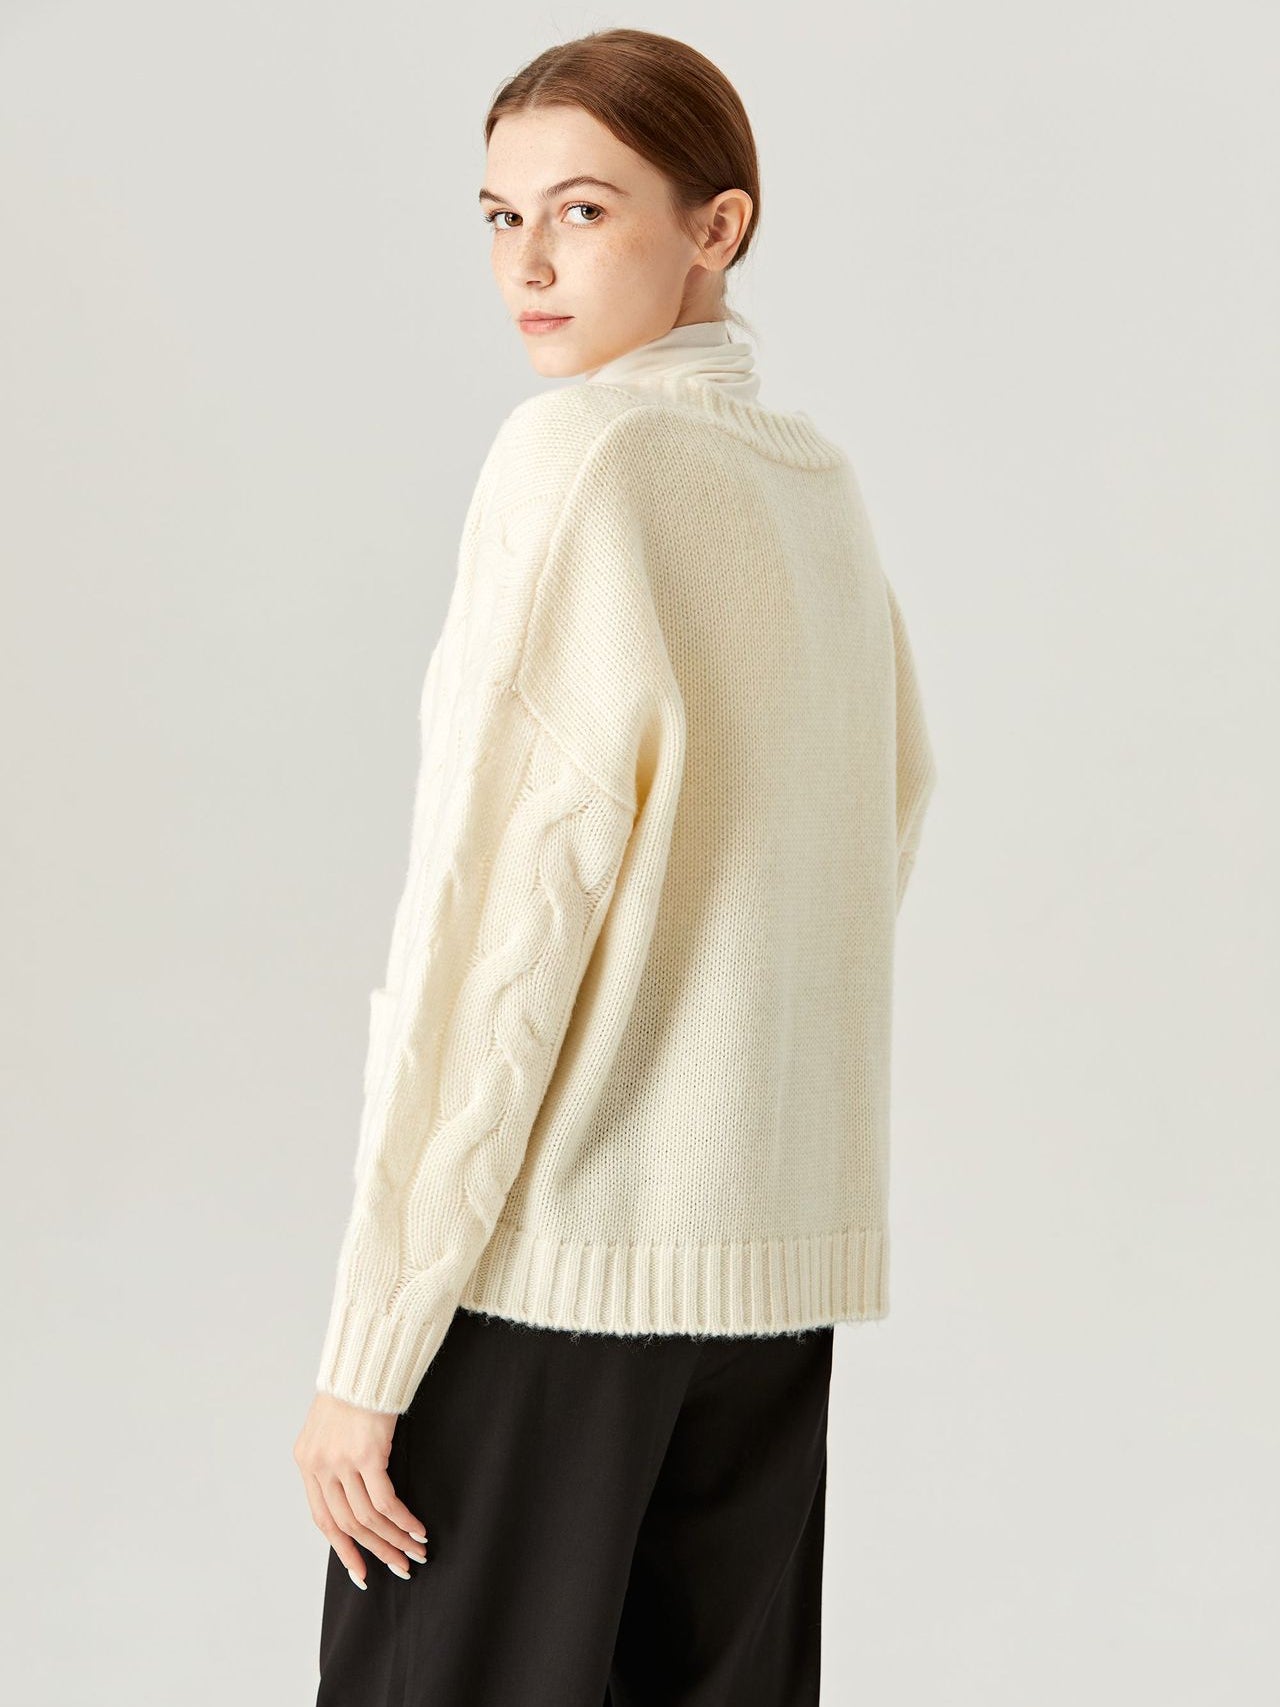 Call Me Cozy Cable Knit Turtleneck Cardigans